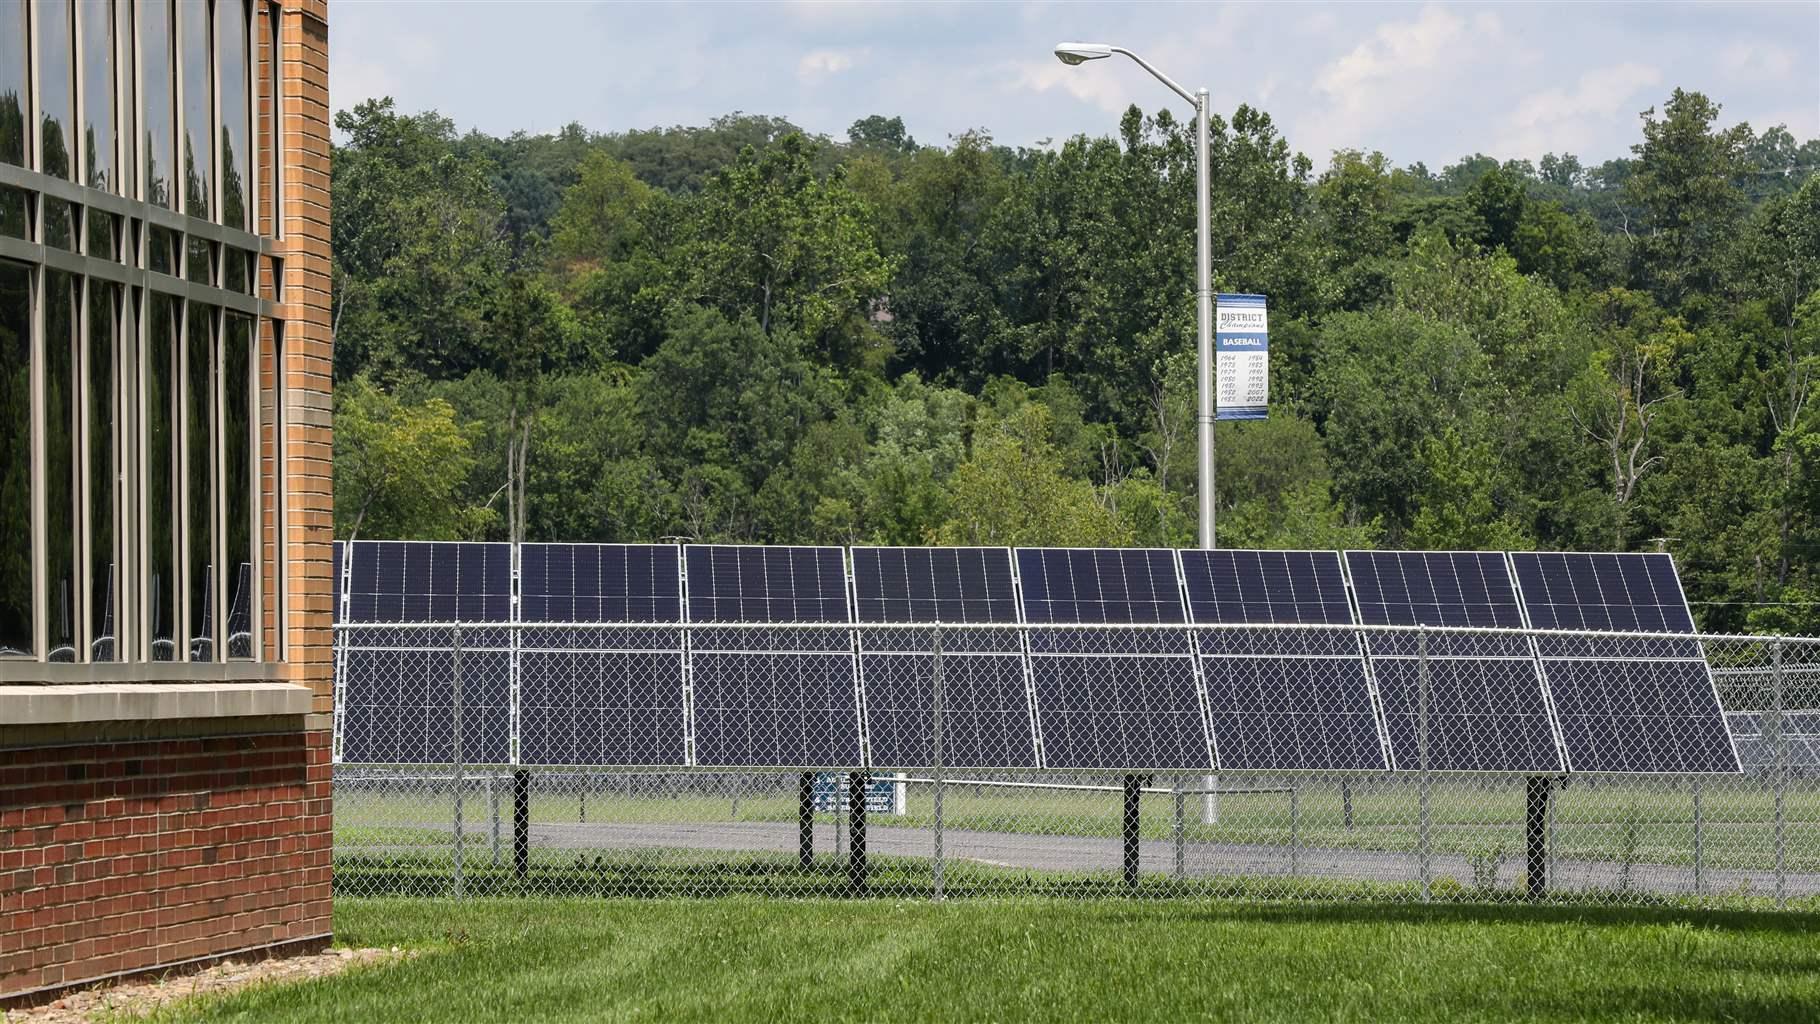 Tilted solar panels stand side by side behind a chain-link fence next to a school building and green field. Beyond the panels, trees rise twice as high as the black-and-silver solar array.